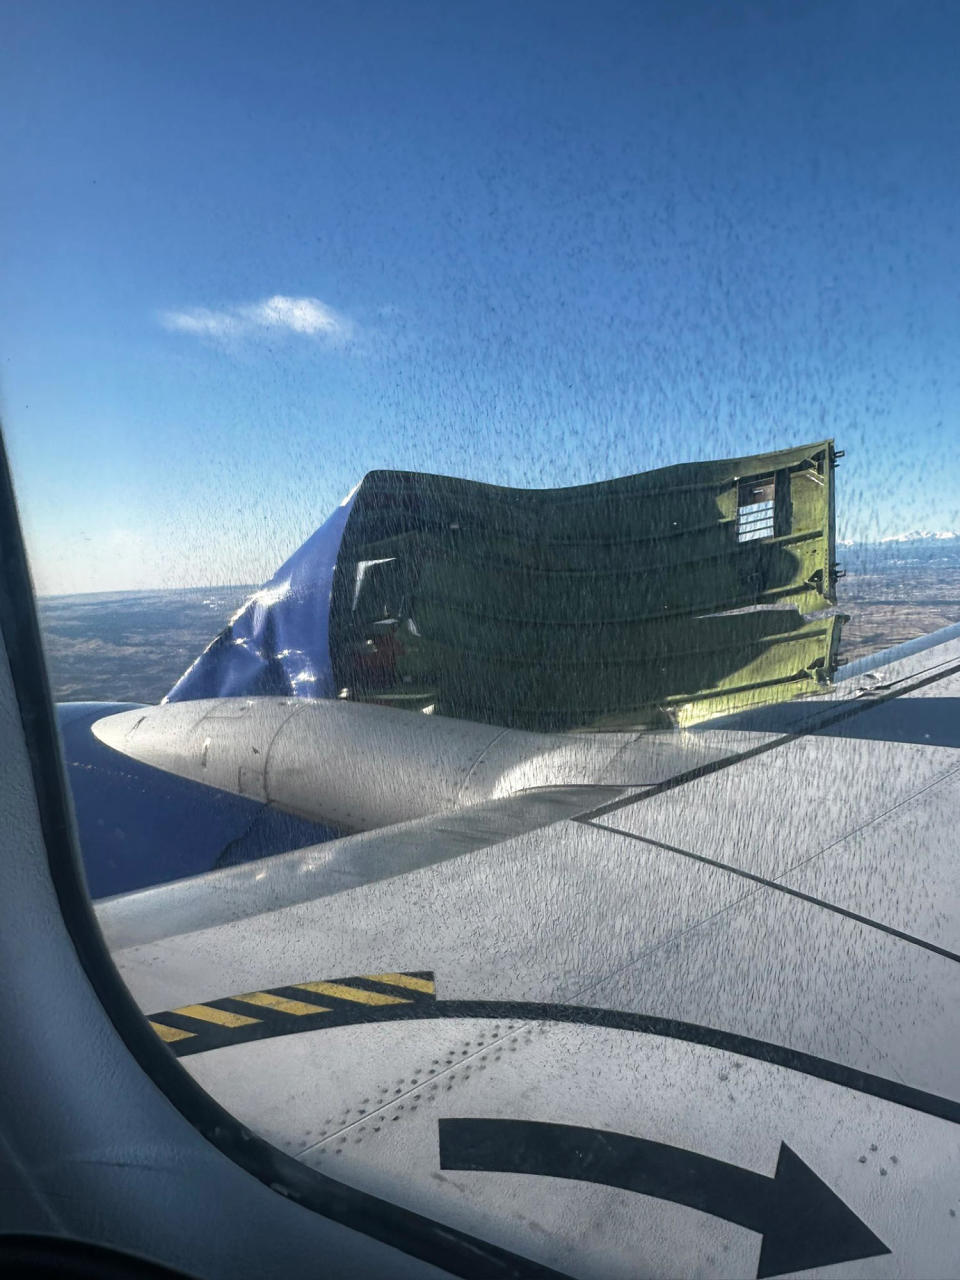 The engine cowling hanging from the wing of a Southwest Airlines flight (Cooper Glass)